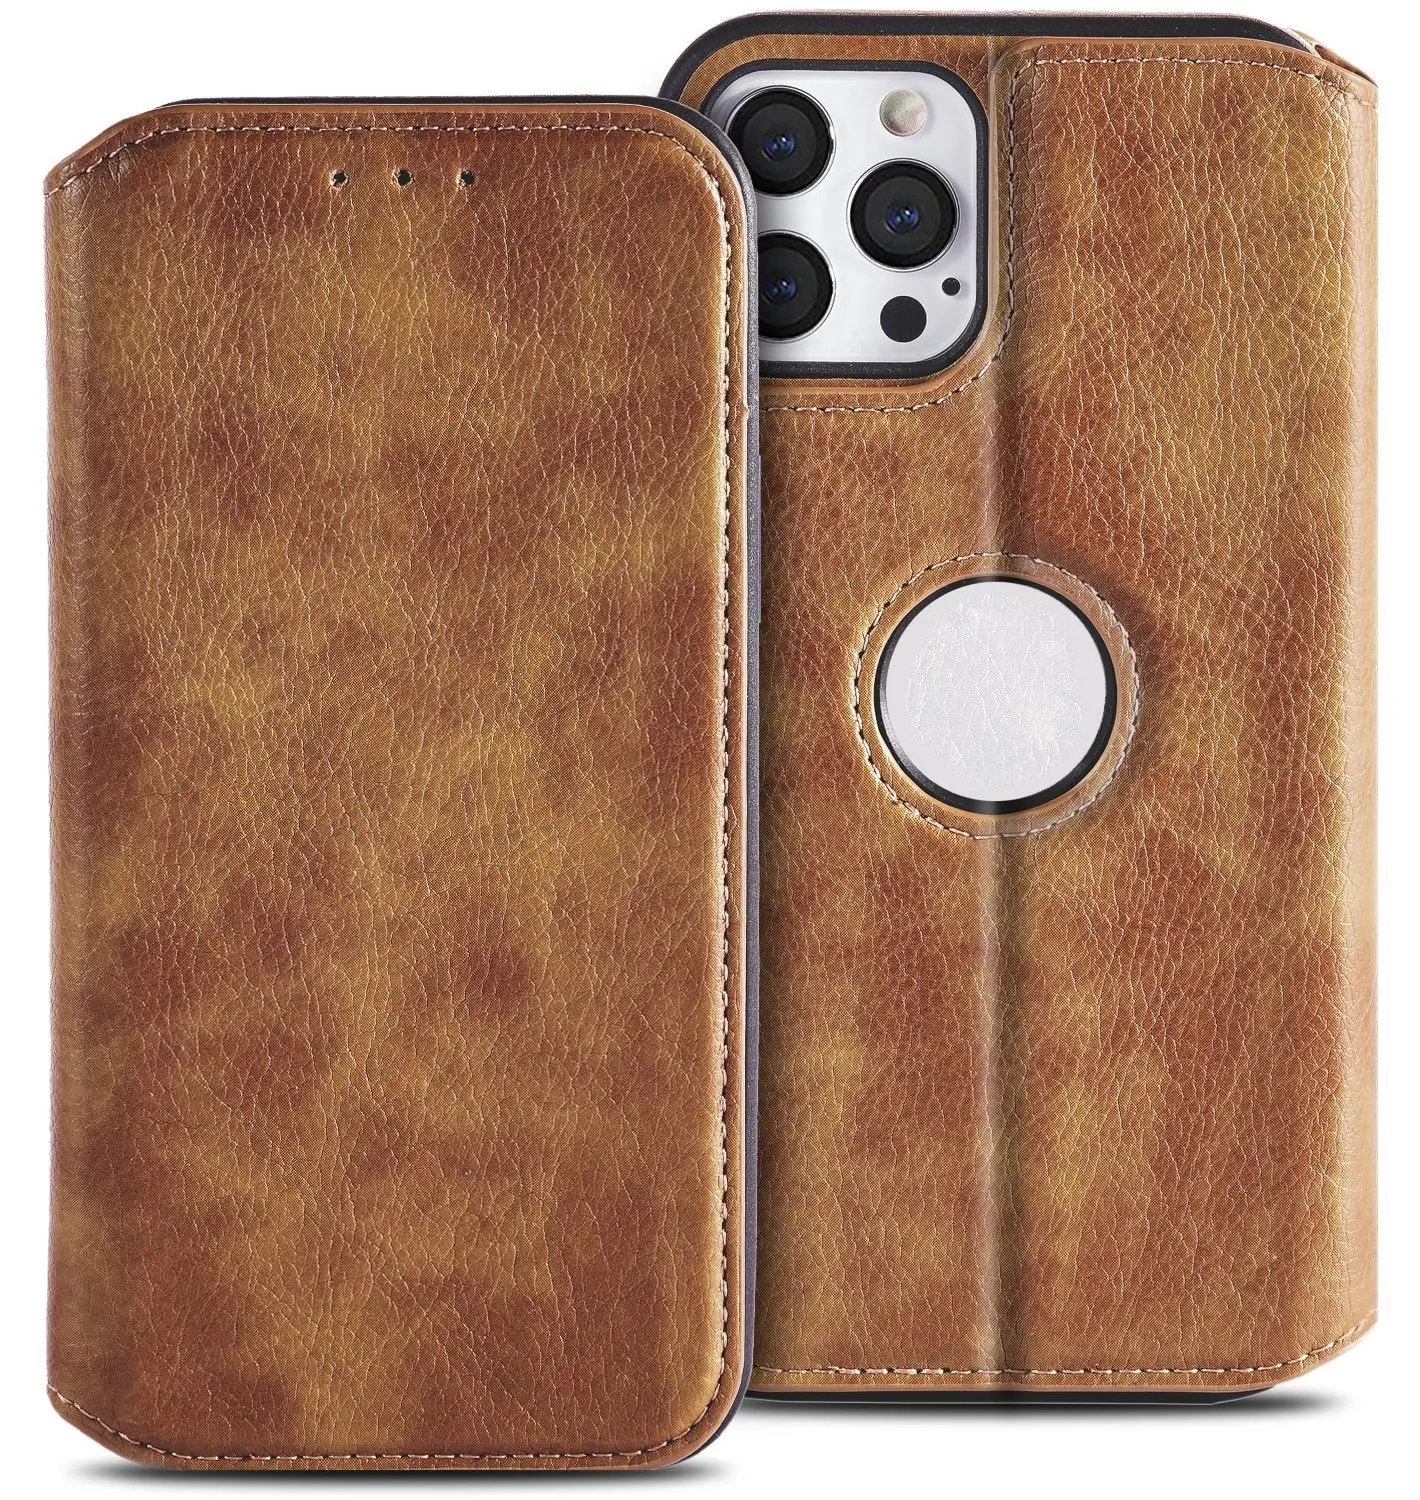 High Quality Luxury Leather Phone Case For iPhone 12 13 14 11 Pro XR XS Max 8 7 Plus Flip Wallet Card Slot Stand Phone Cover